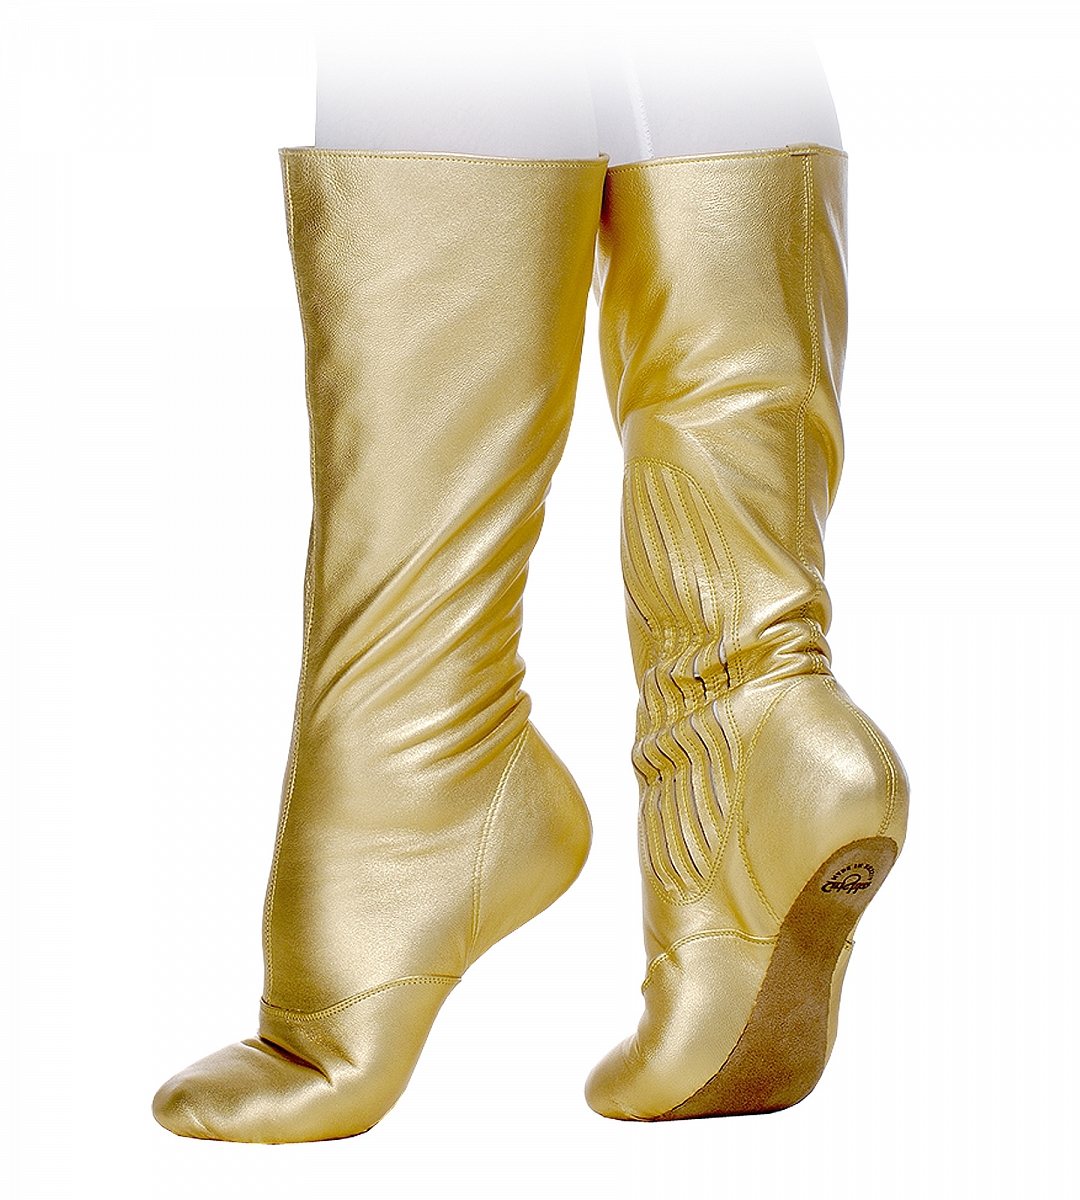 03228 Male ballet boots with pleats (03228) | Grishko® Buy online the best ballet products. now!